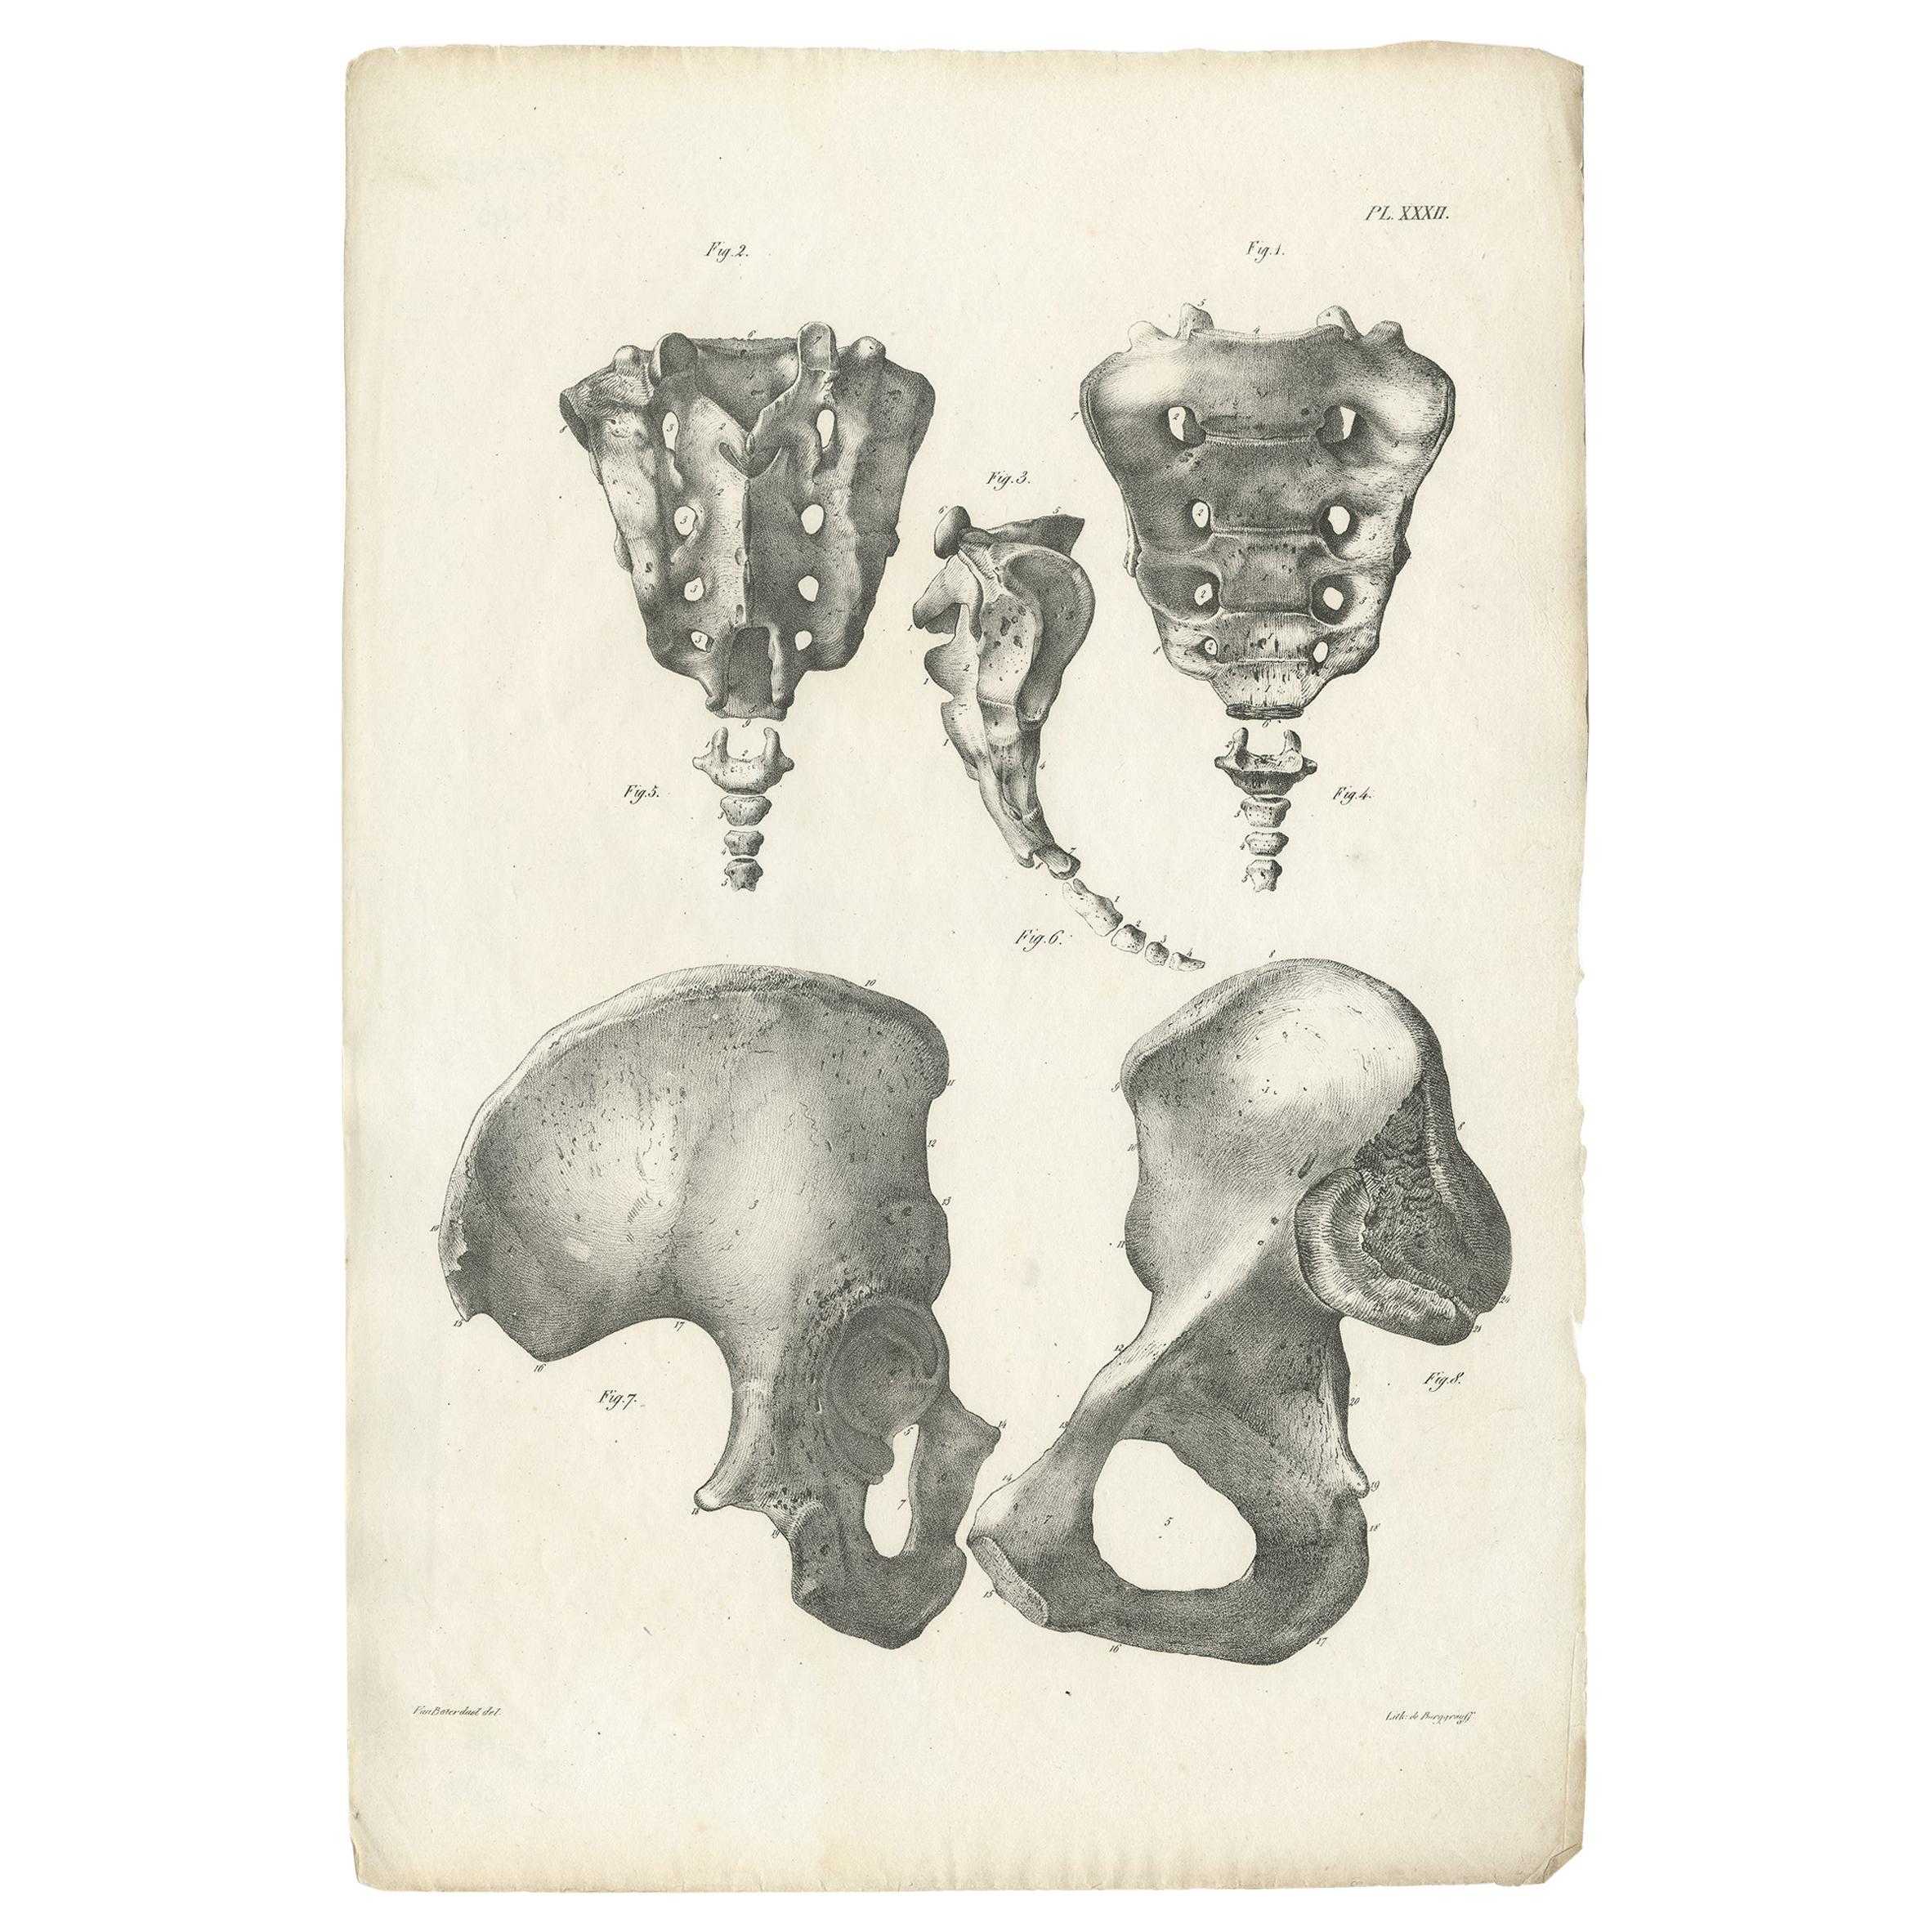 Pl. XXXII Antique Anatomy / Medical Print of the Pelvis by Cloquet, 1821